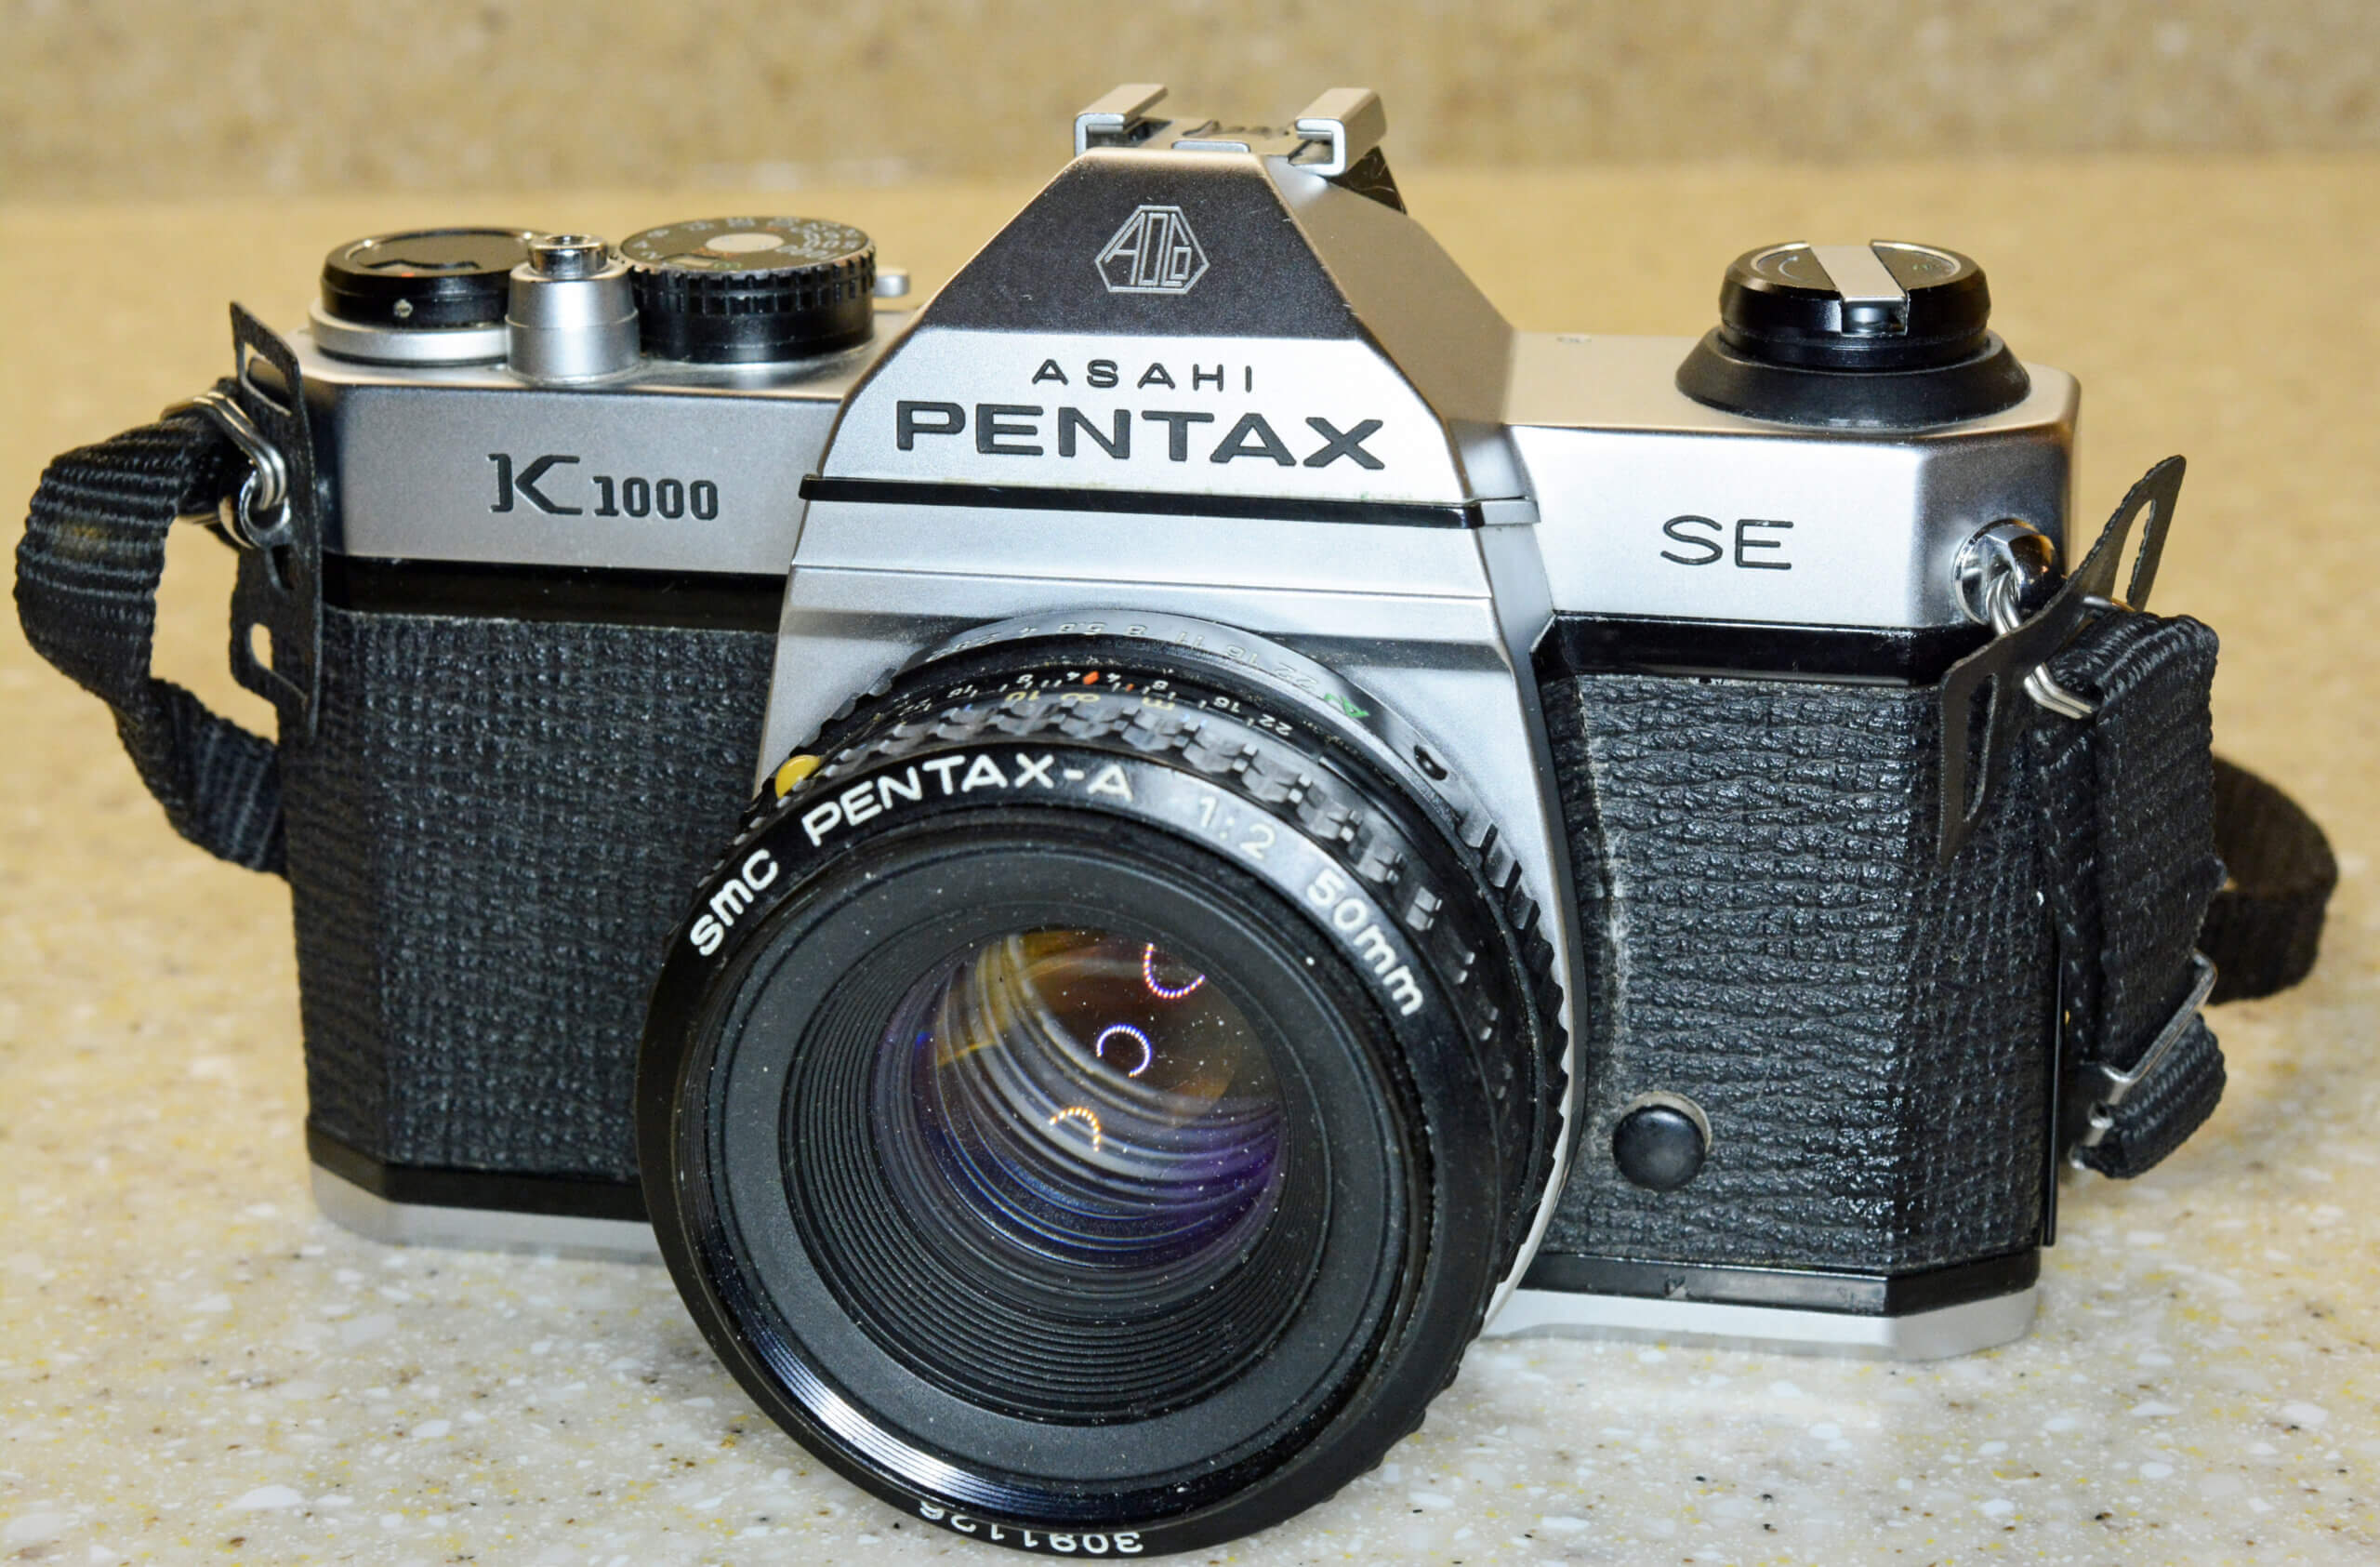 News from the Pentax Film Project